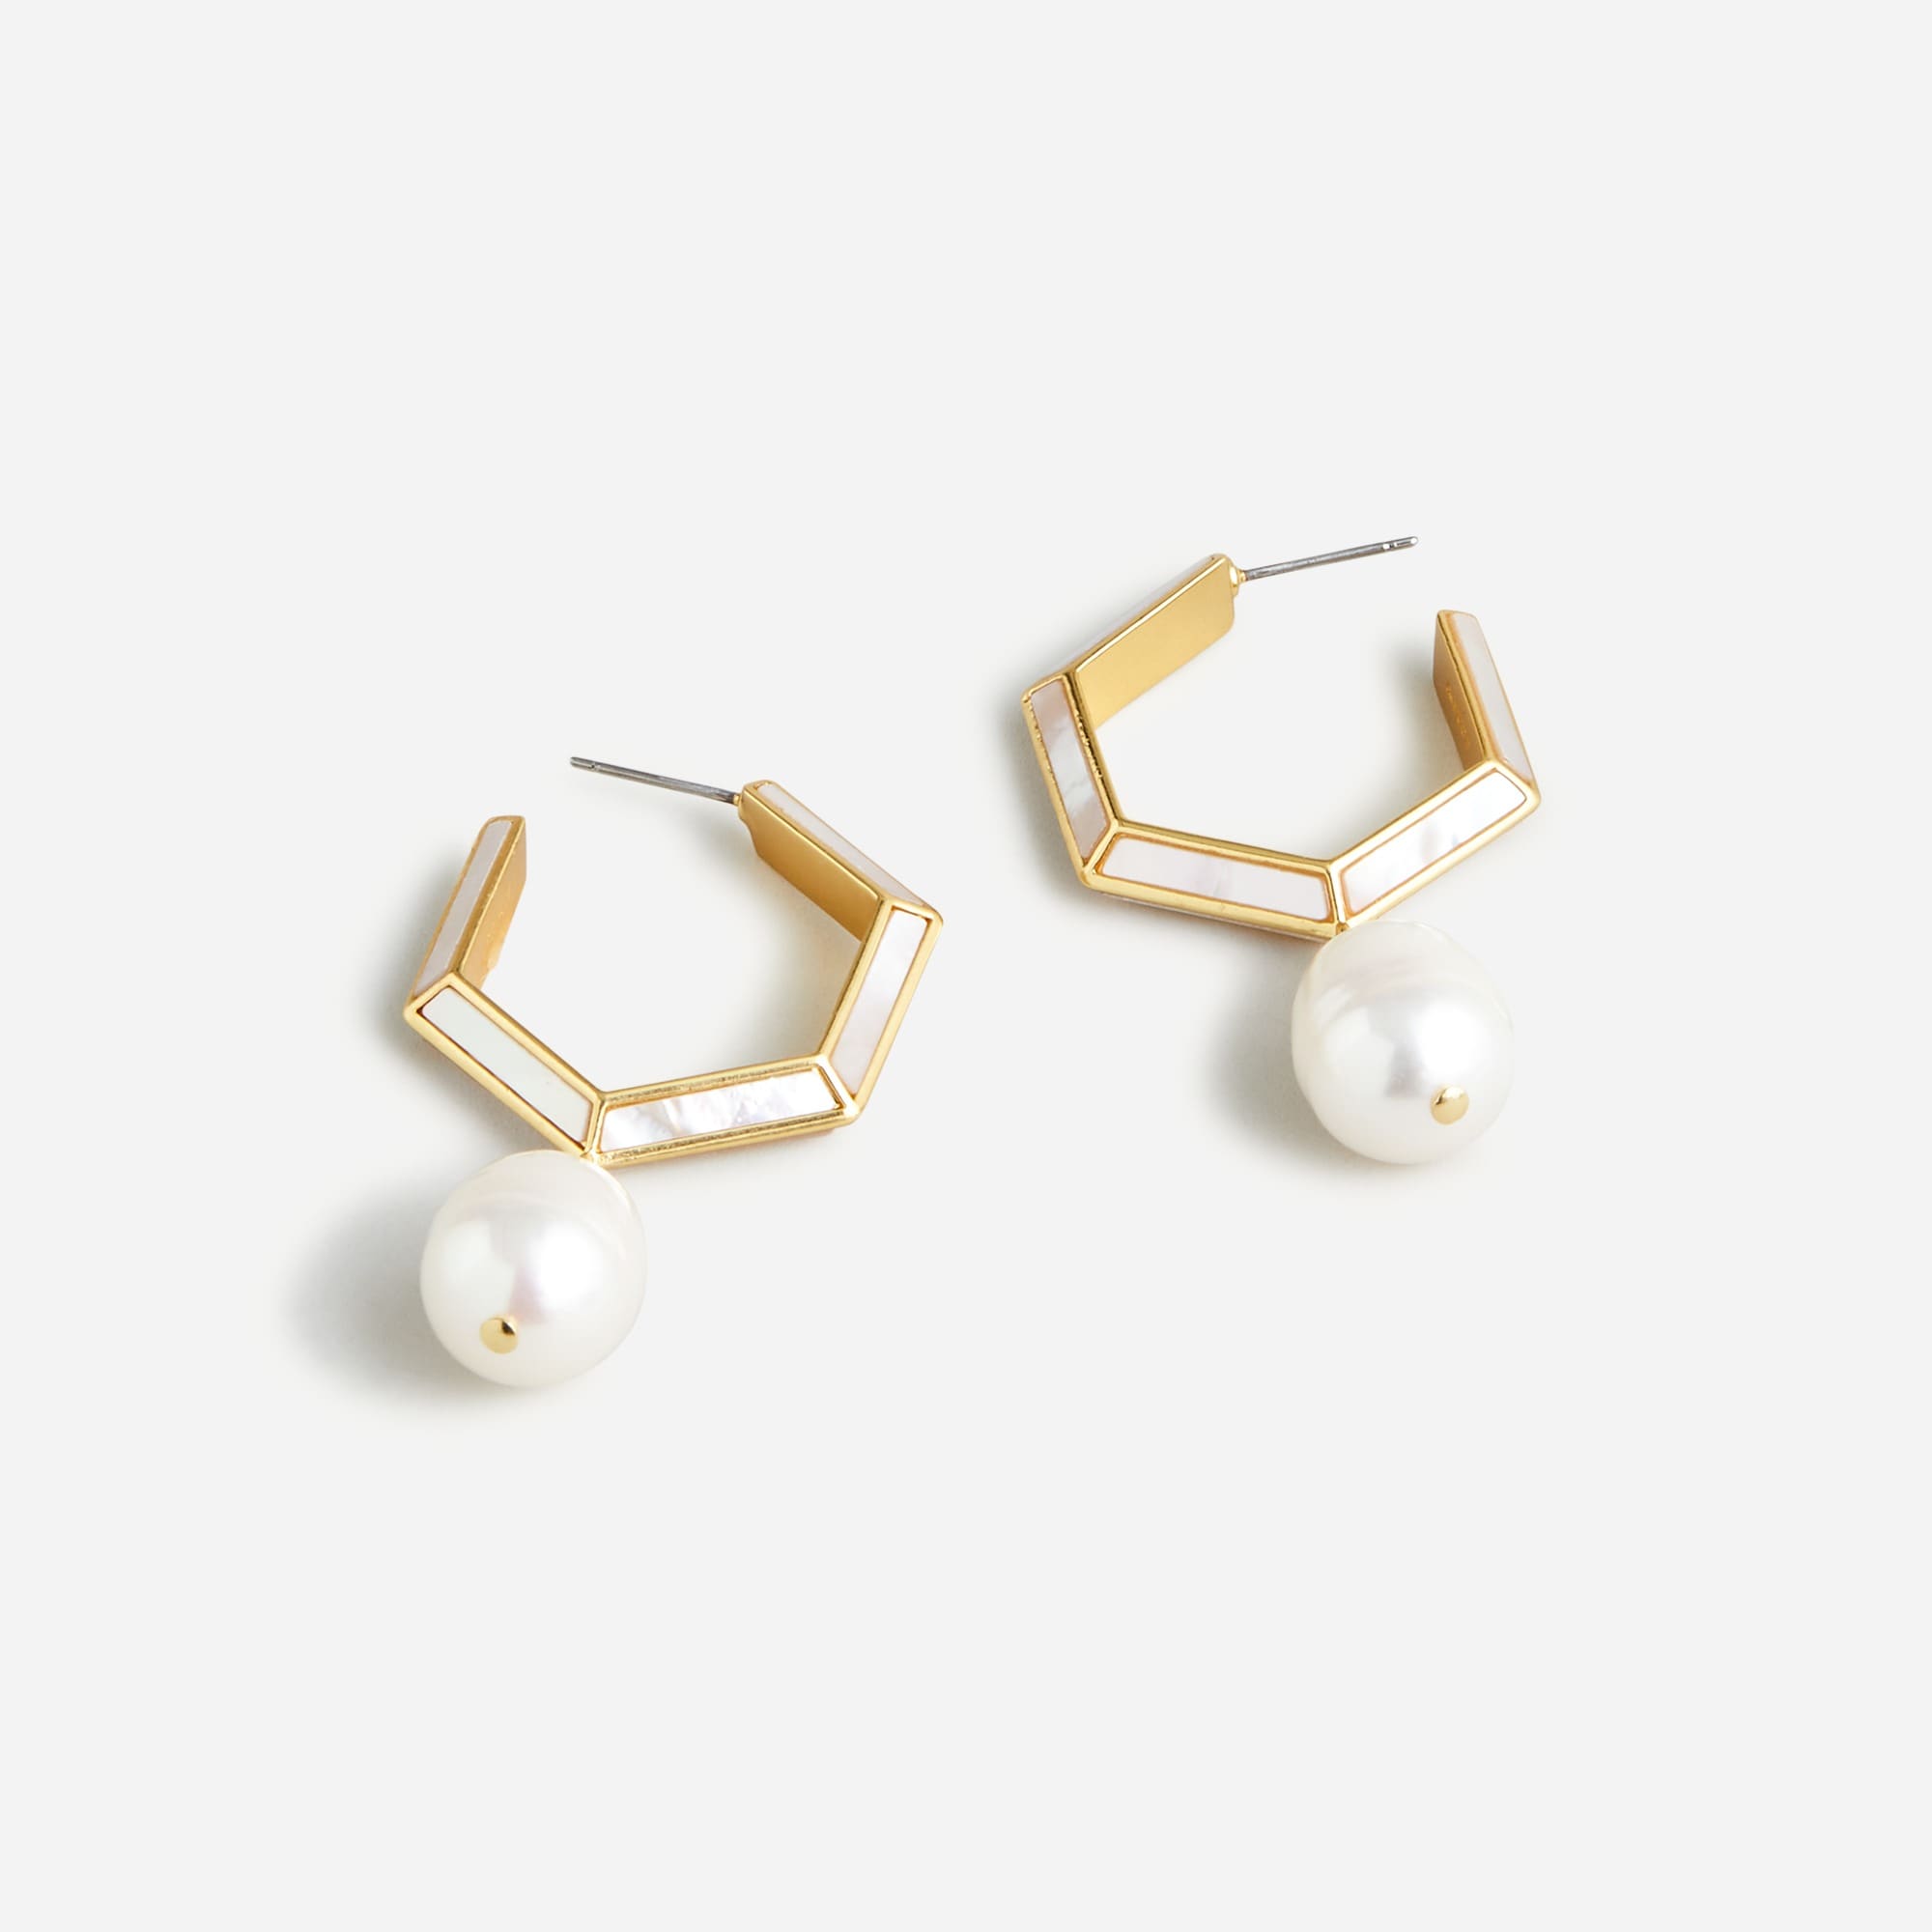 J.Crew: Mother-of-pearl Triangle Prism Hoop Earrings For Women